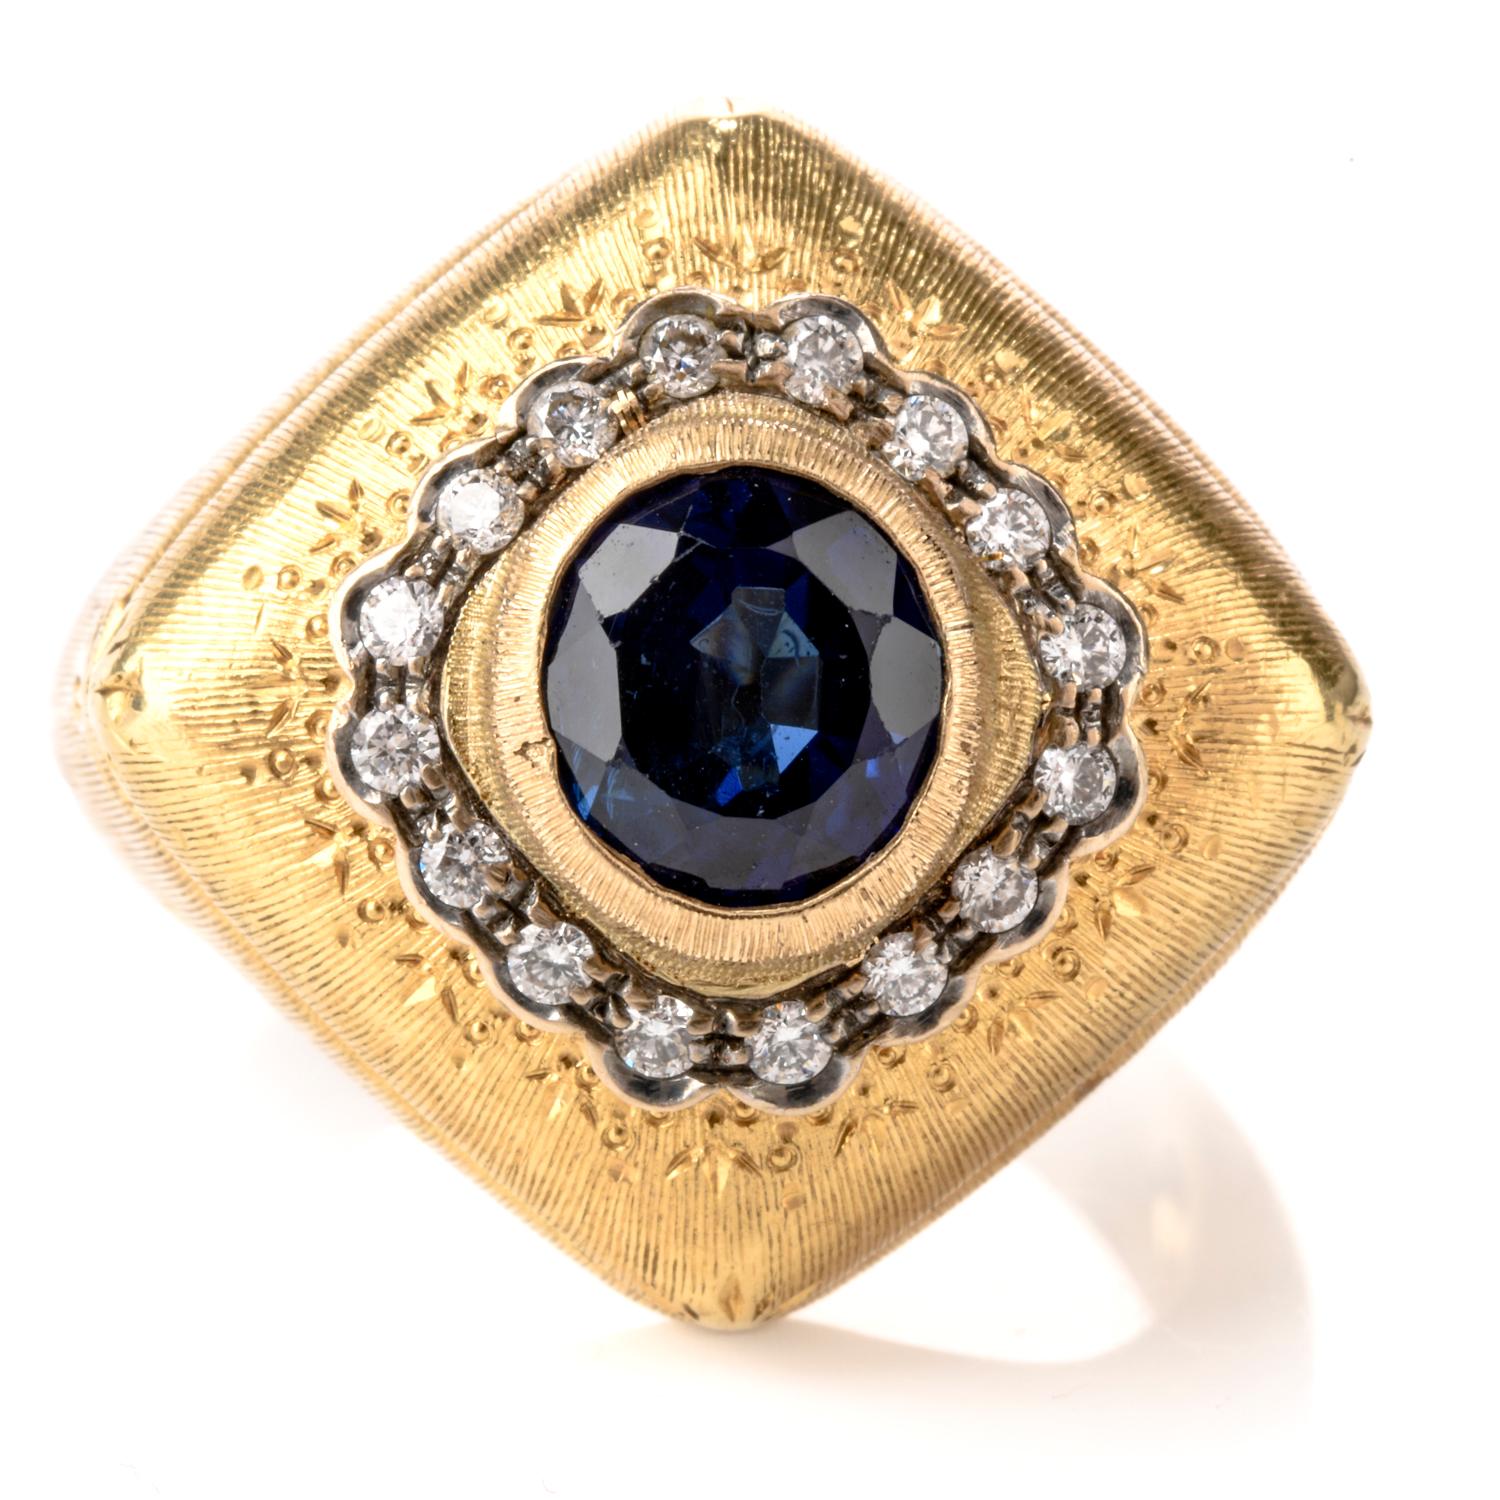 A Holiday to Remember! Make this the one You'll Remember with this stunning DIamond and Sapphire

Buccellati ring crafted in Luxurious 18K Gold. Highlighted this holiday is the vibrant round faceted Royal Blue Sapphire

weighing appx. 1.10 carats. A